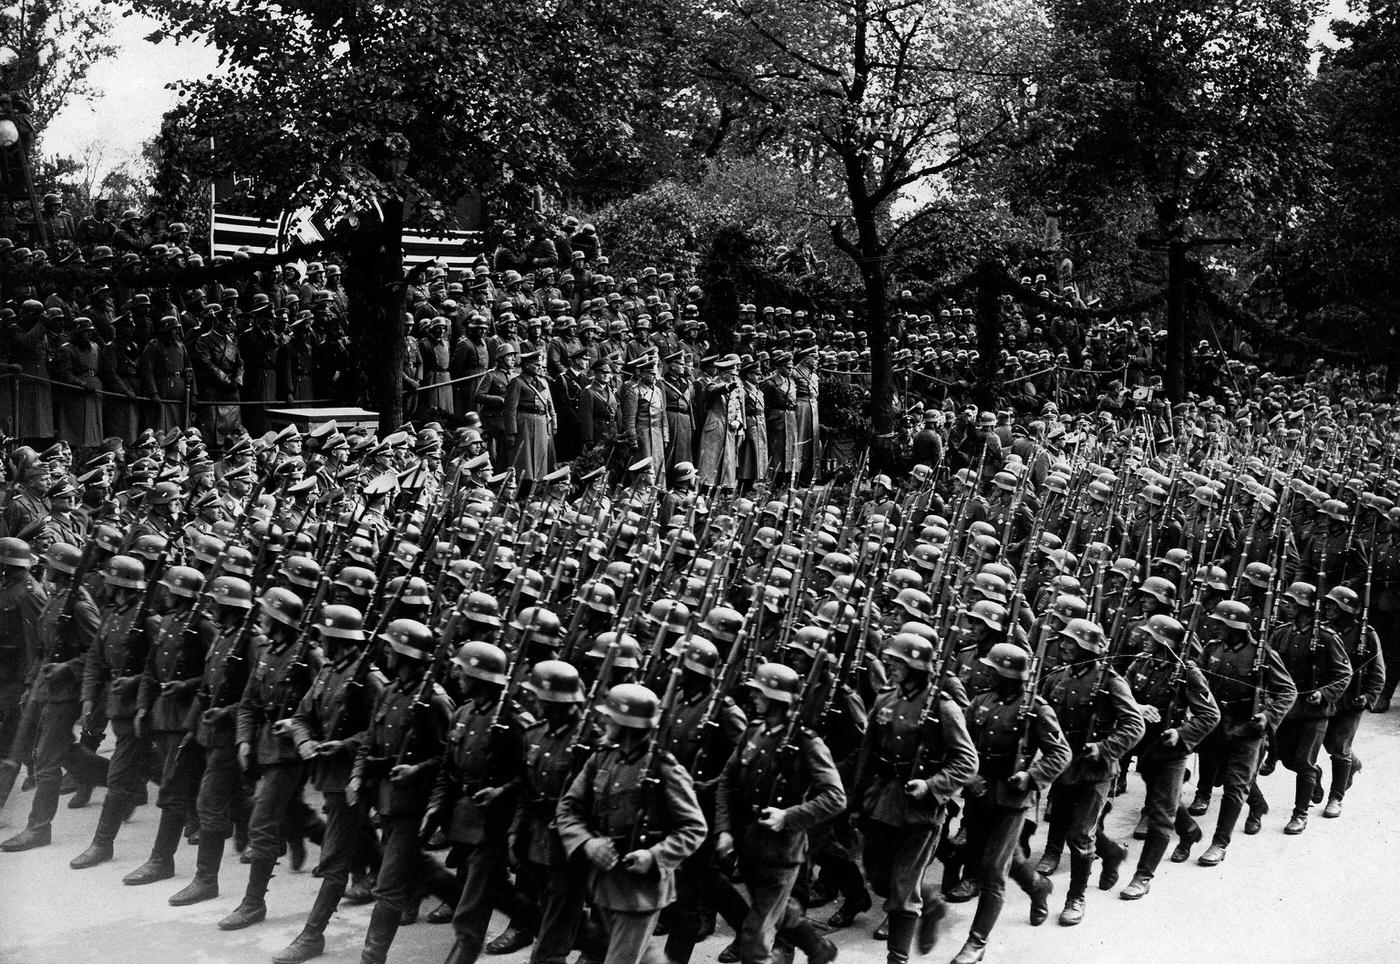 This photograph captures soldiers marching in front of Adolf Hitler on Ujazdowski Avenue in Warsaw during World War II in Poland.